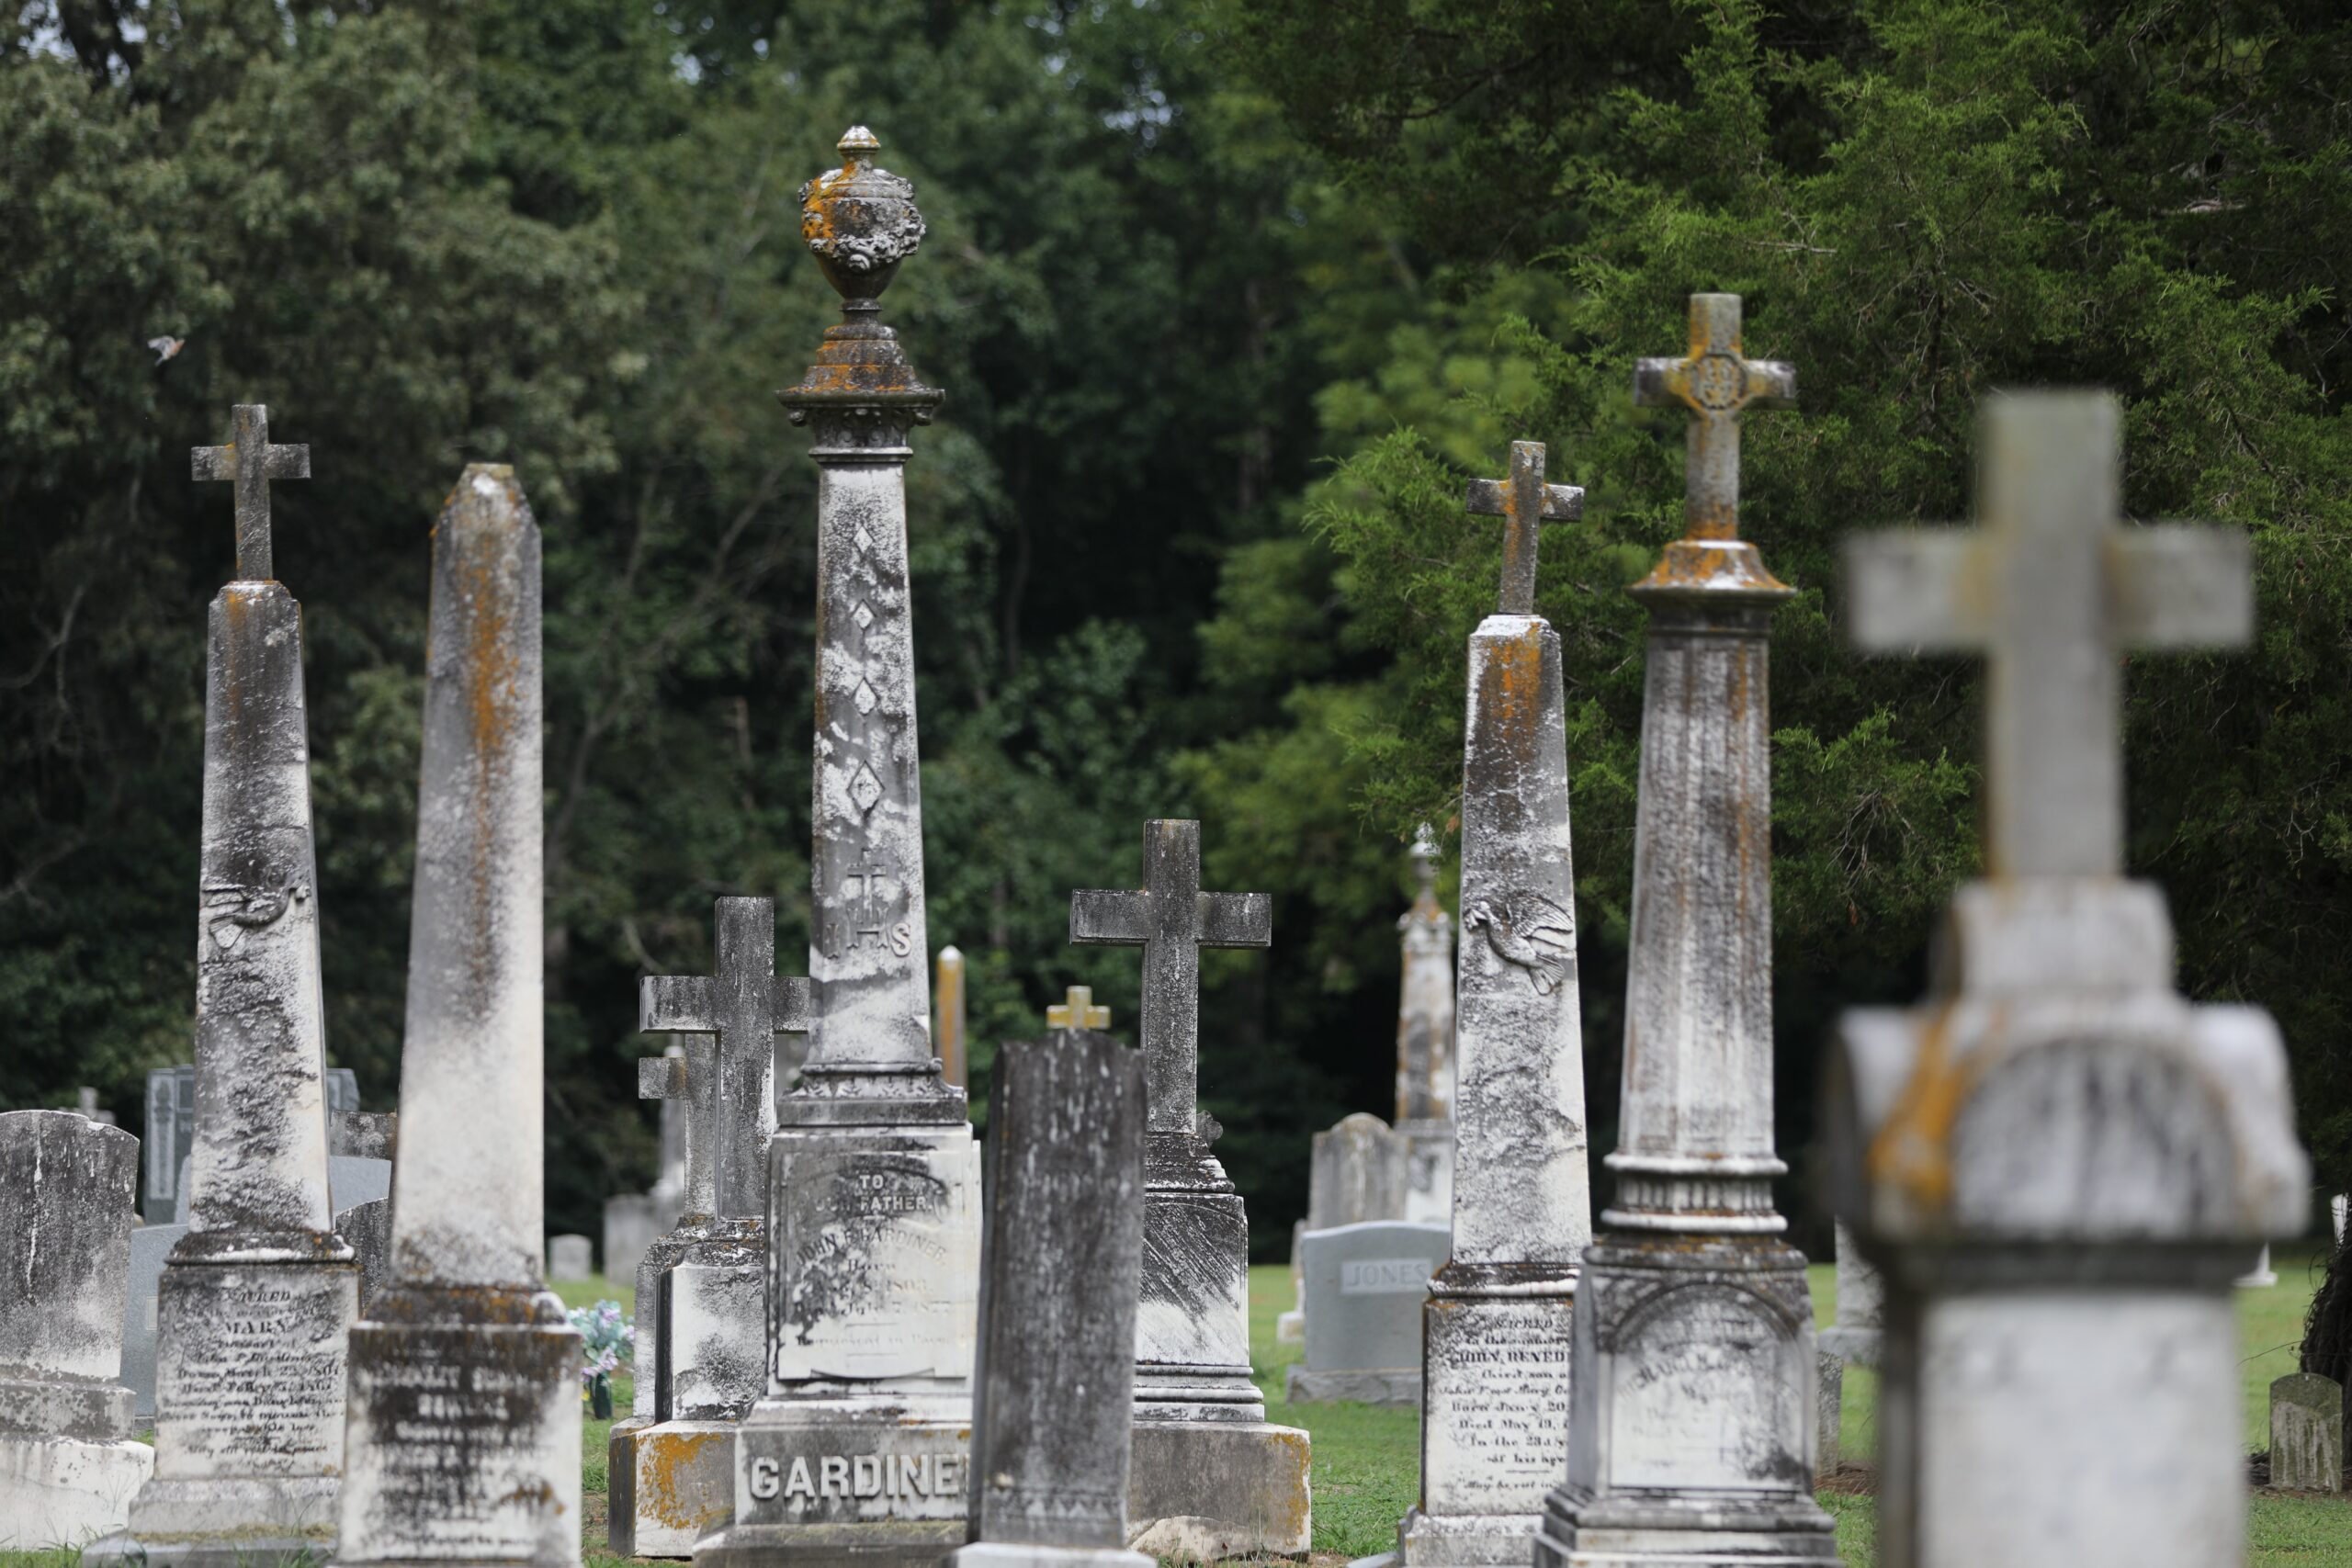 Tombstones are pictured in the cemetery at historic St. Mary's Catholic Church in Bryantown, Md., Aug. 25, 2022. (OSV News photo/CNS file, Bob Roller)